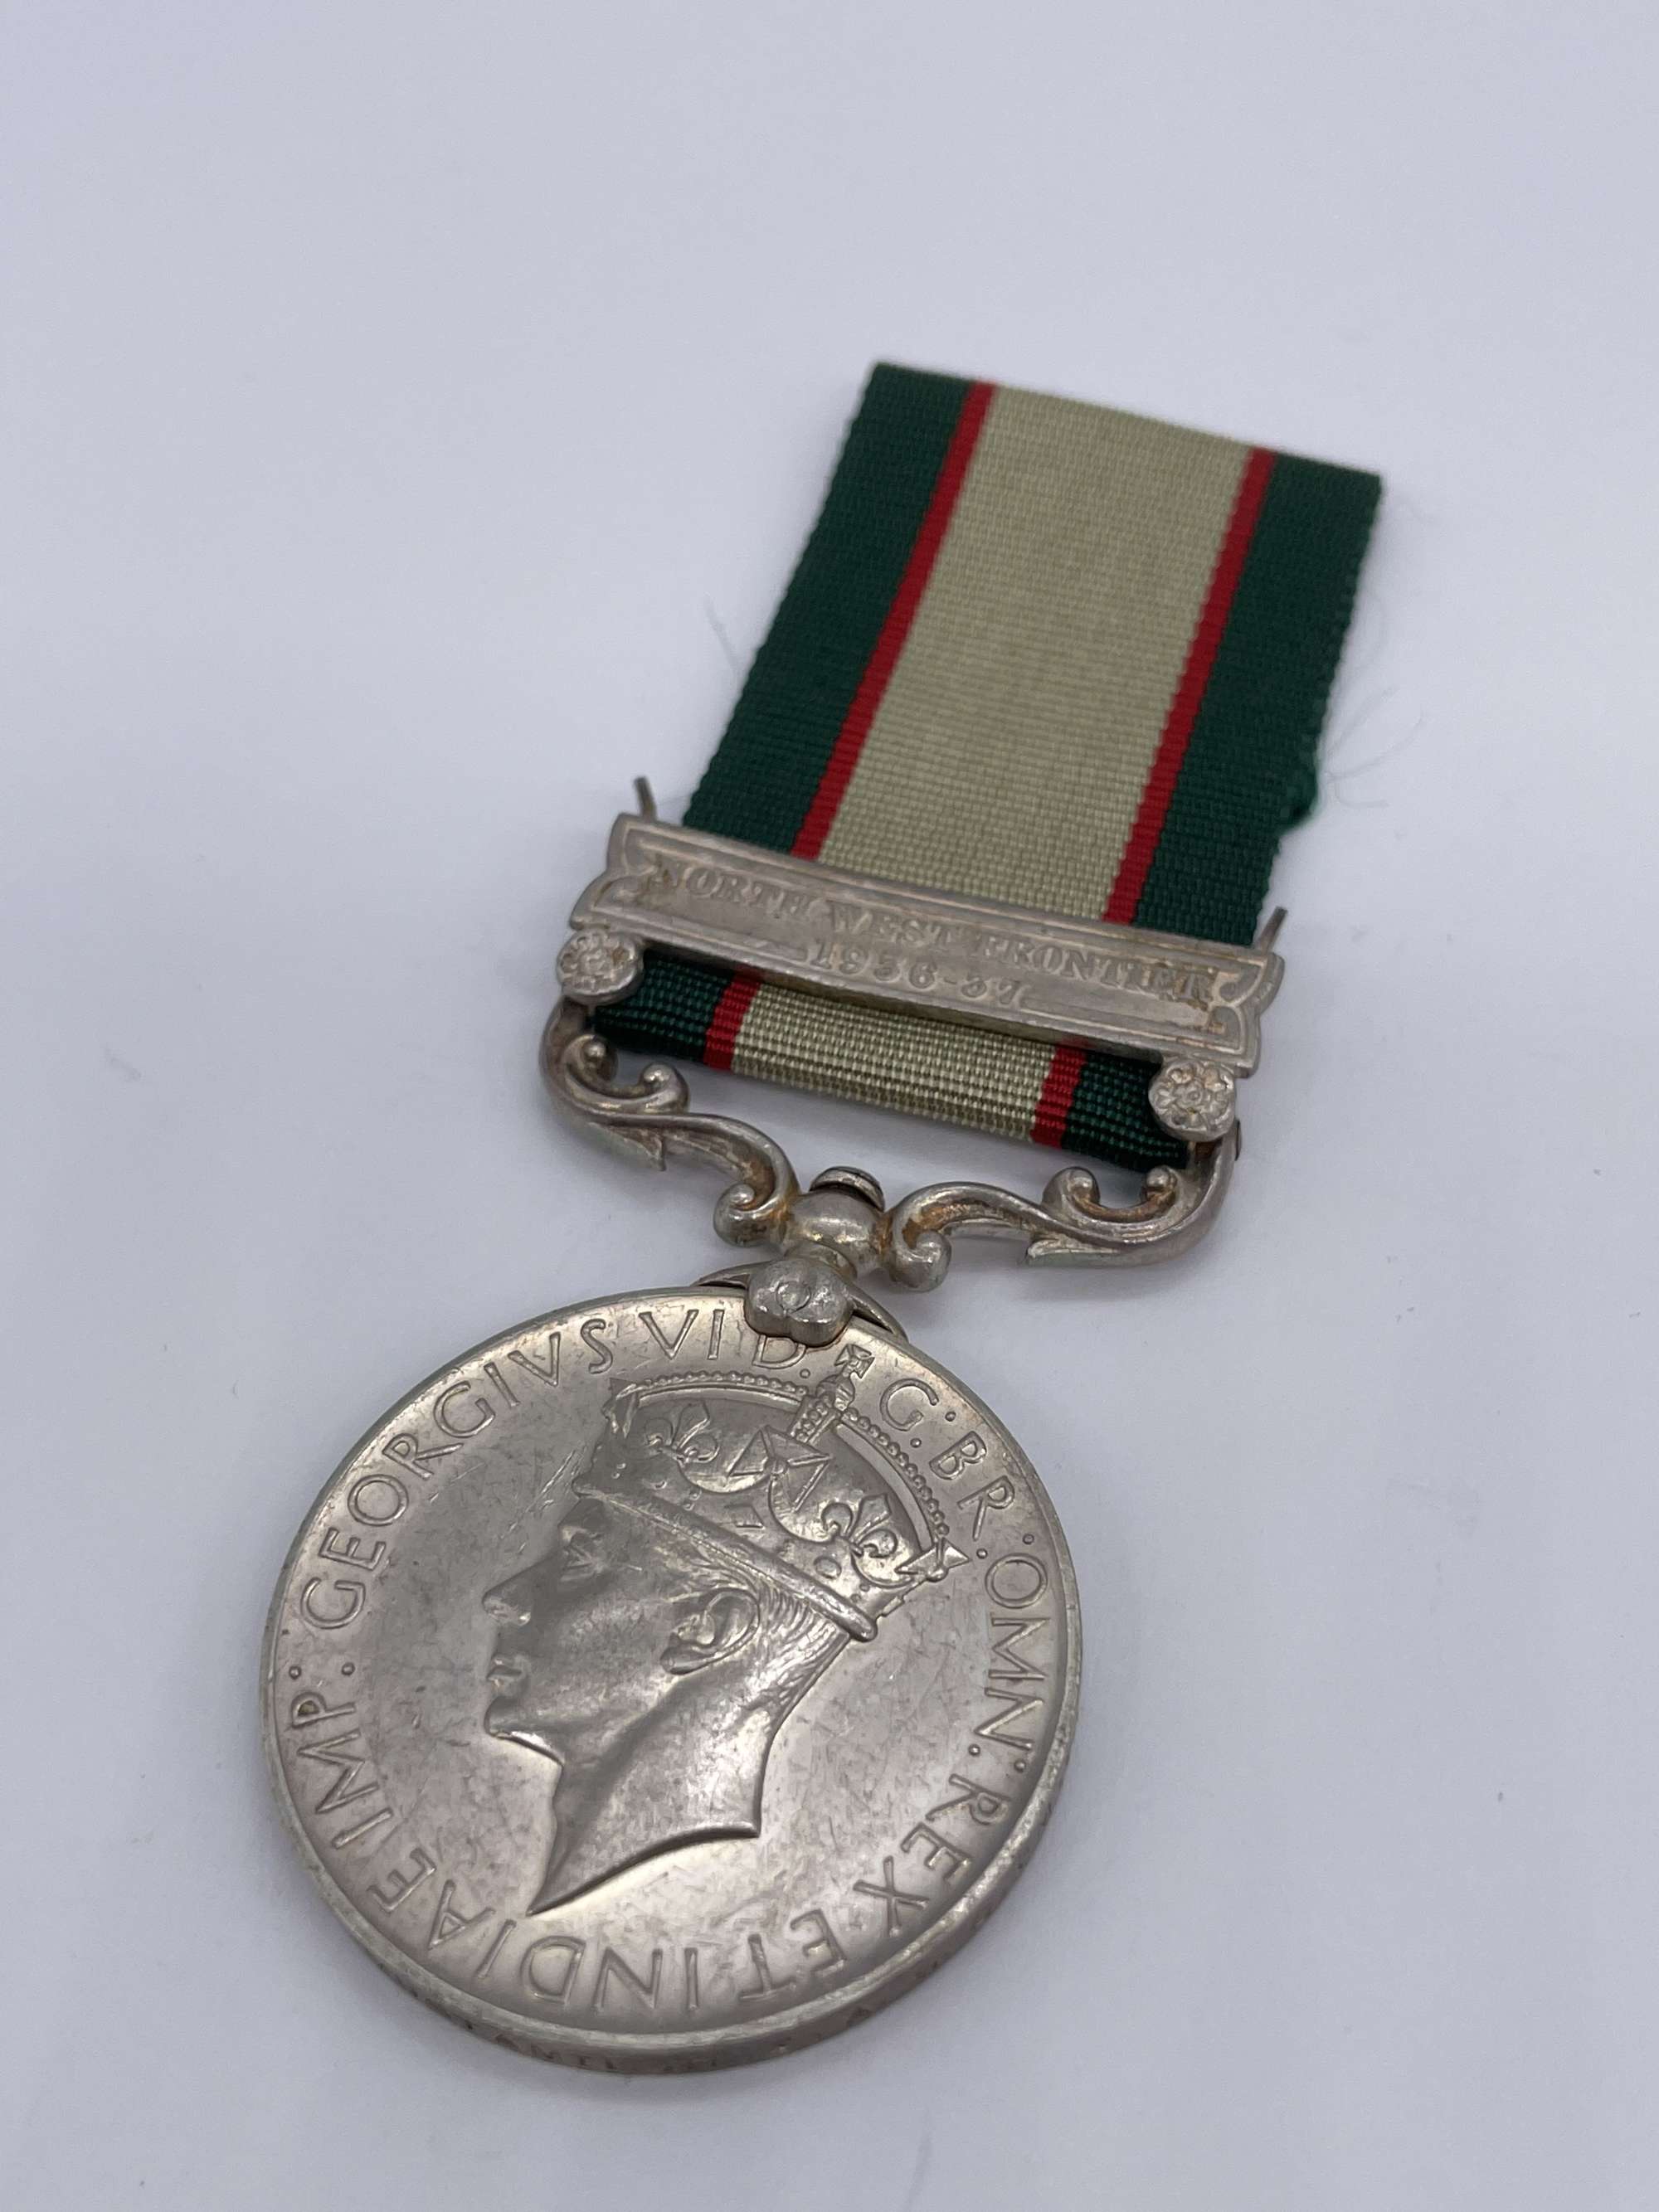 Original 1936 India General Service Medal, North West Frontier 1936-37 Clasp